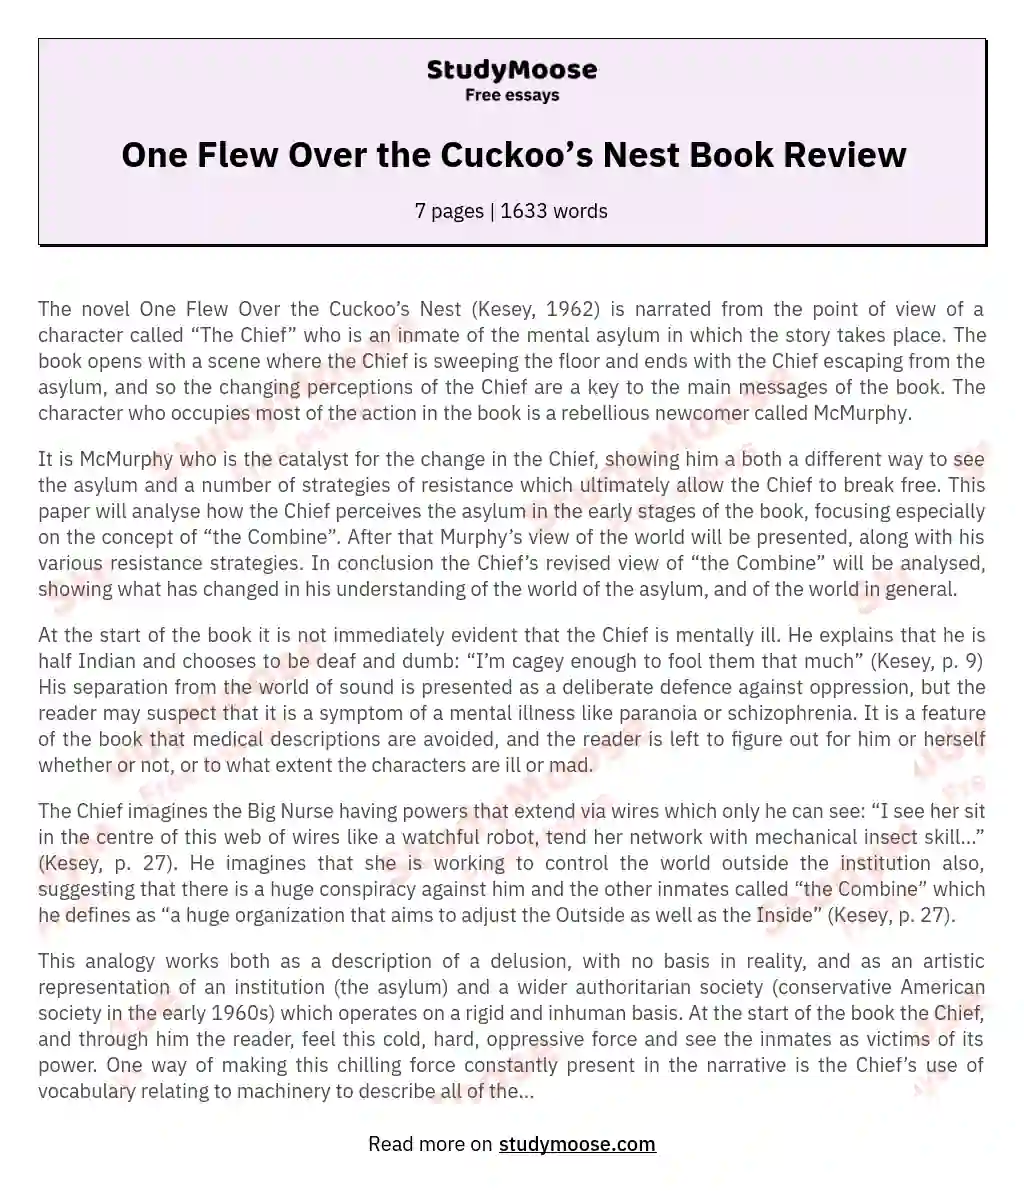 One Flew Over the Cuckoo’s Nest Book Review